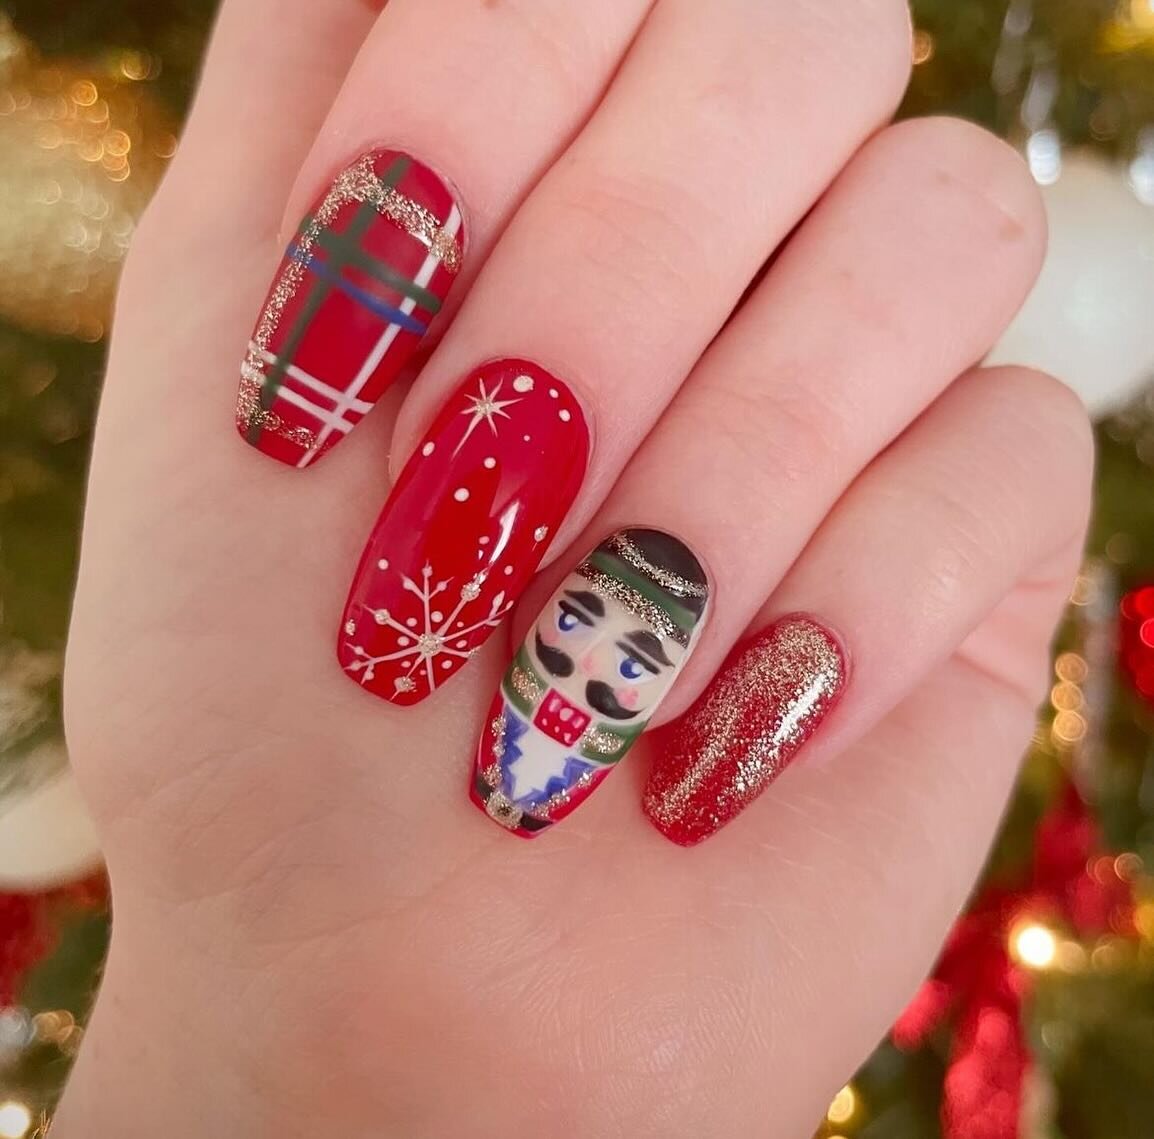 @mlizzg_beauty is POPPING OFF with these holiday sets!🎄🙌🏼😍

Click the link in our bio to book!

#floridanailtech #nailsnailsnails #christmasnails #nailart #stuartnails #pslnails #ftpiercenails